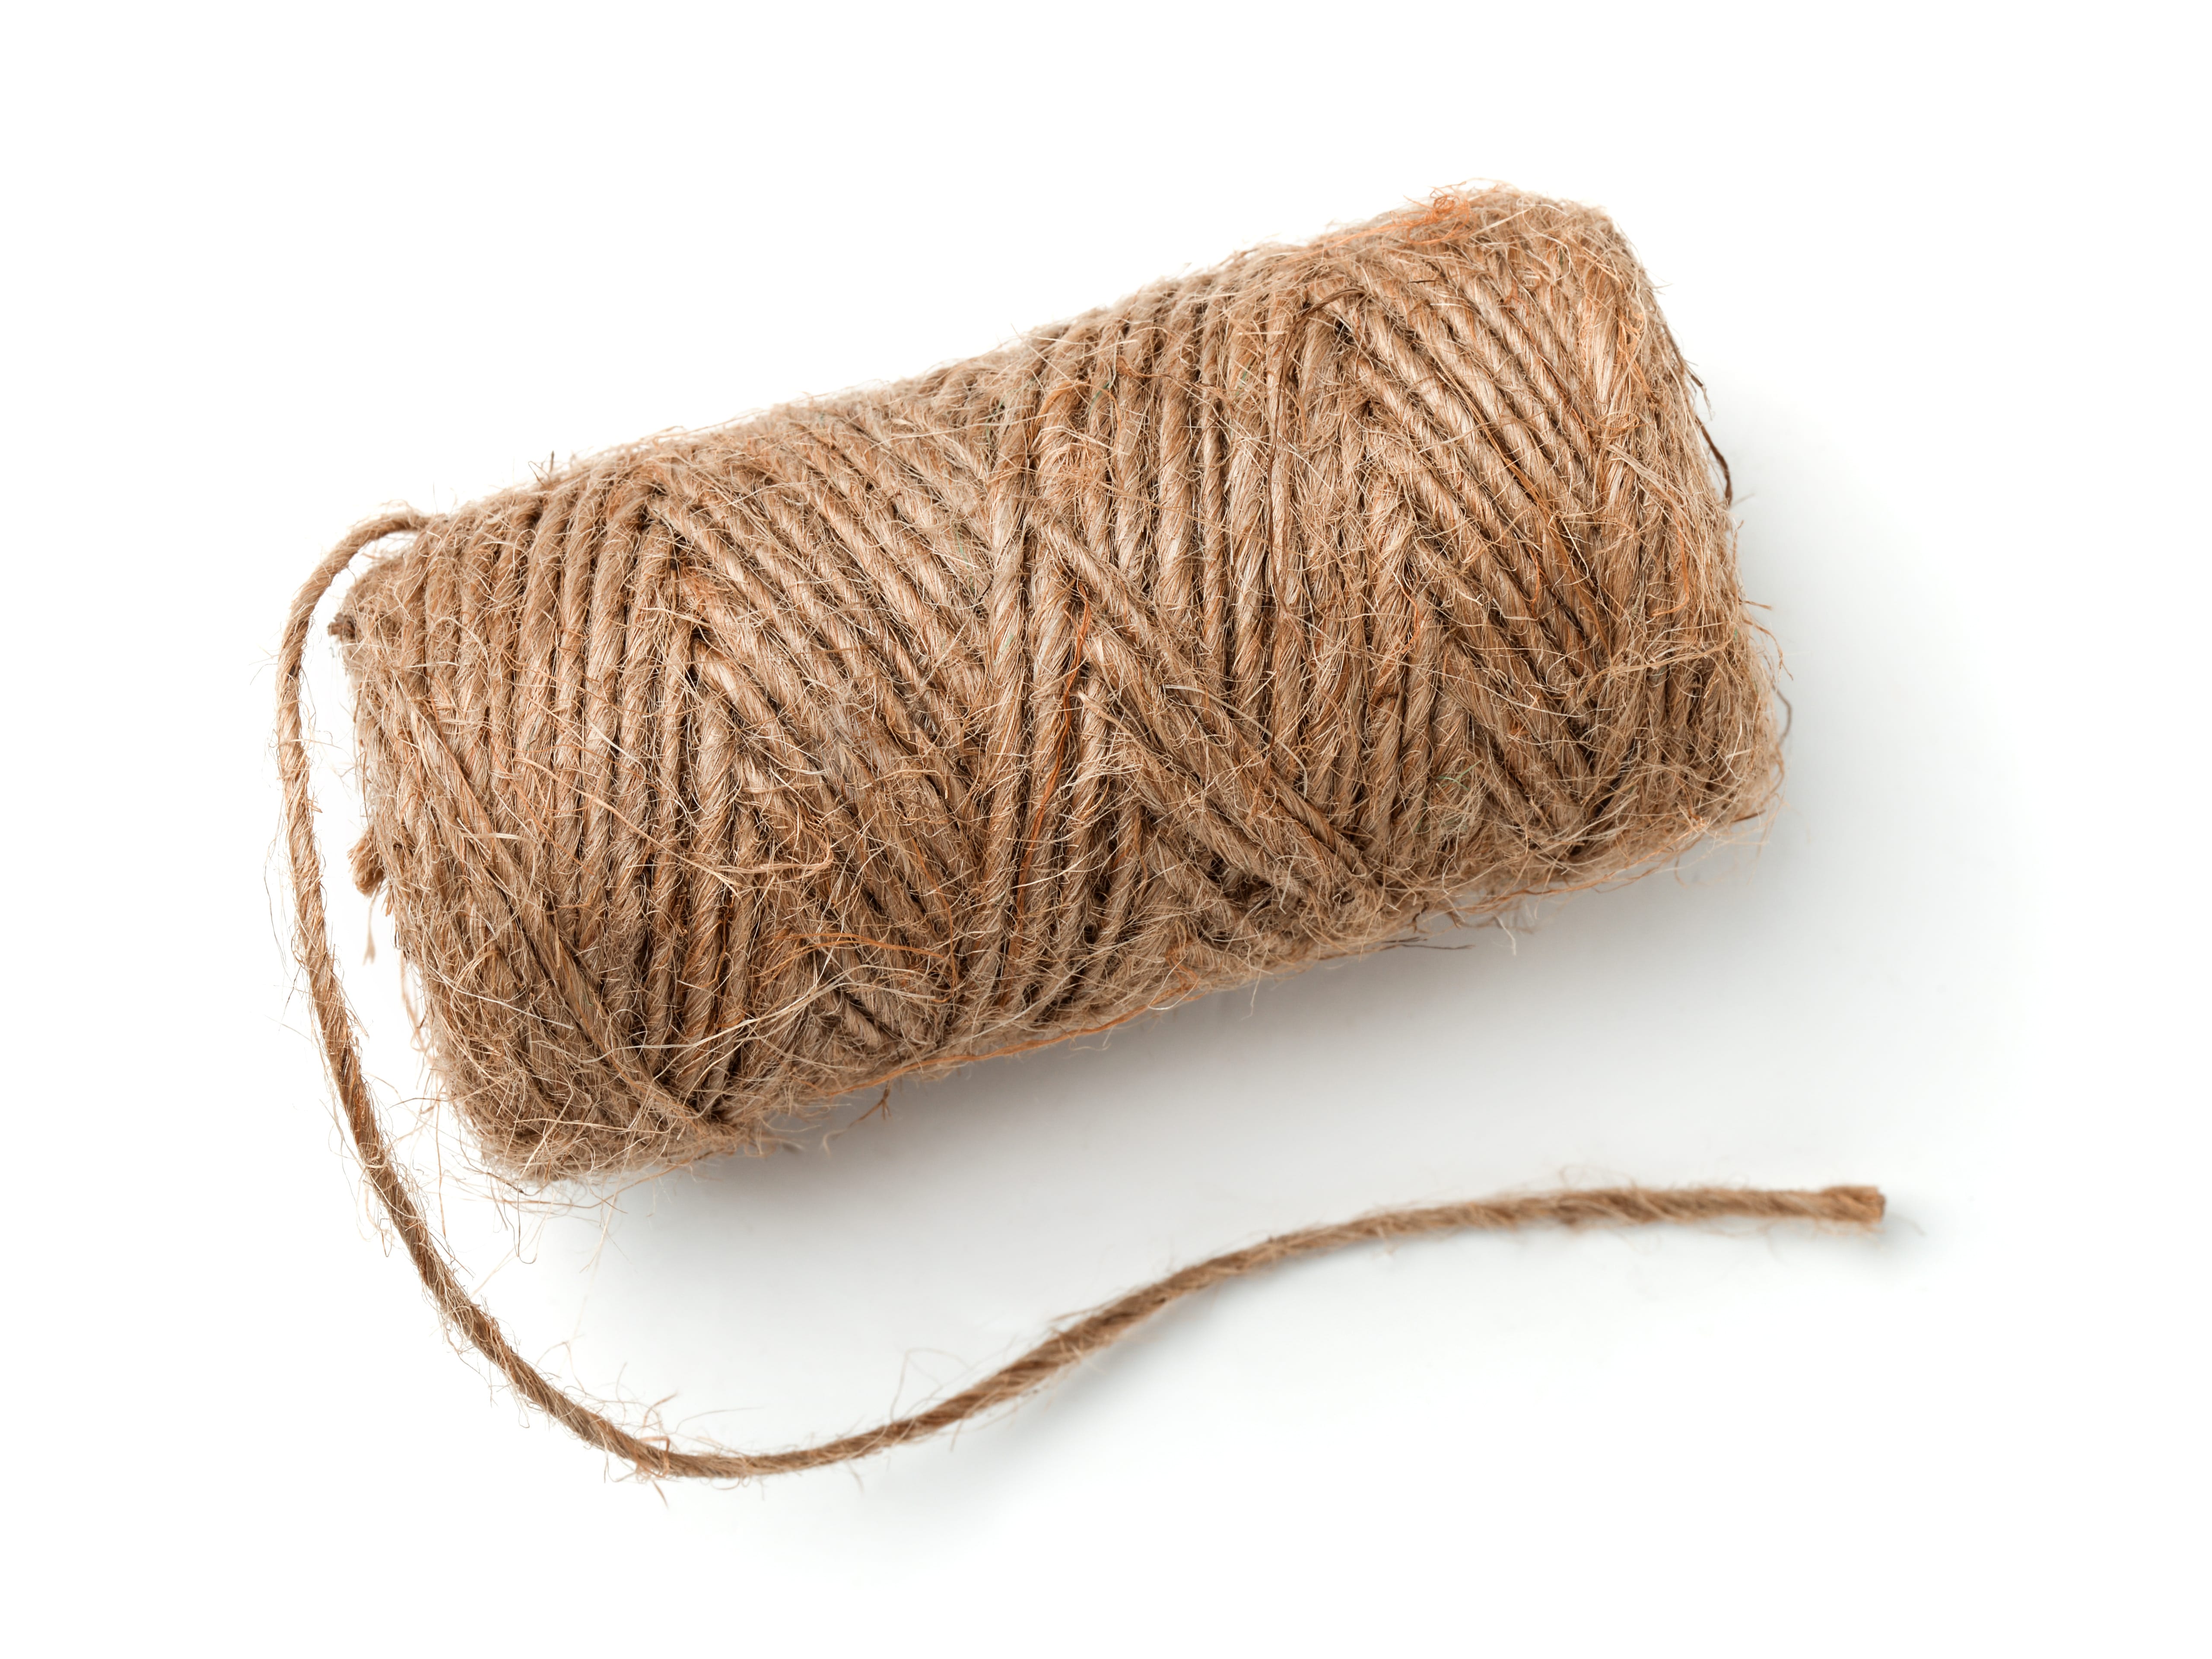 Top view of natural jute twine skein isolated on white